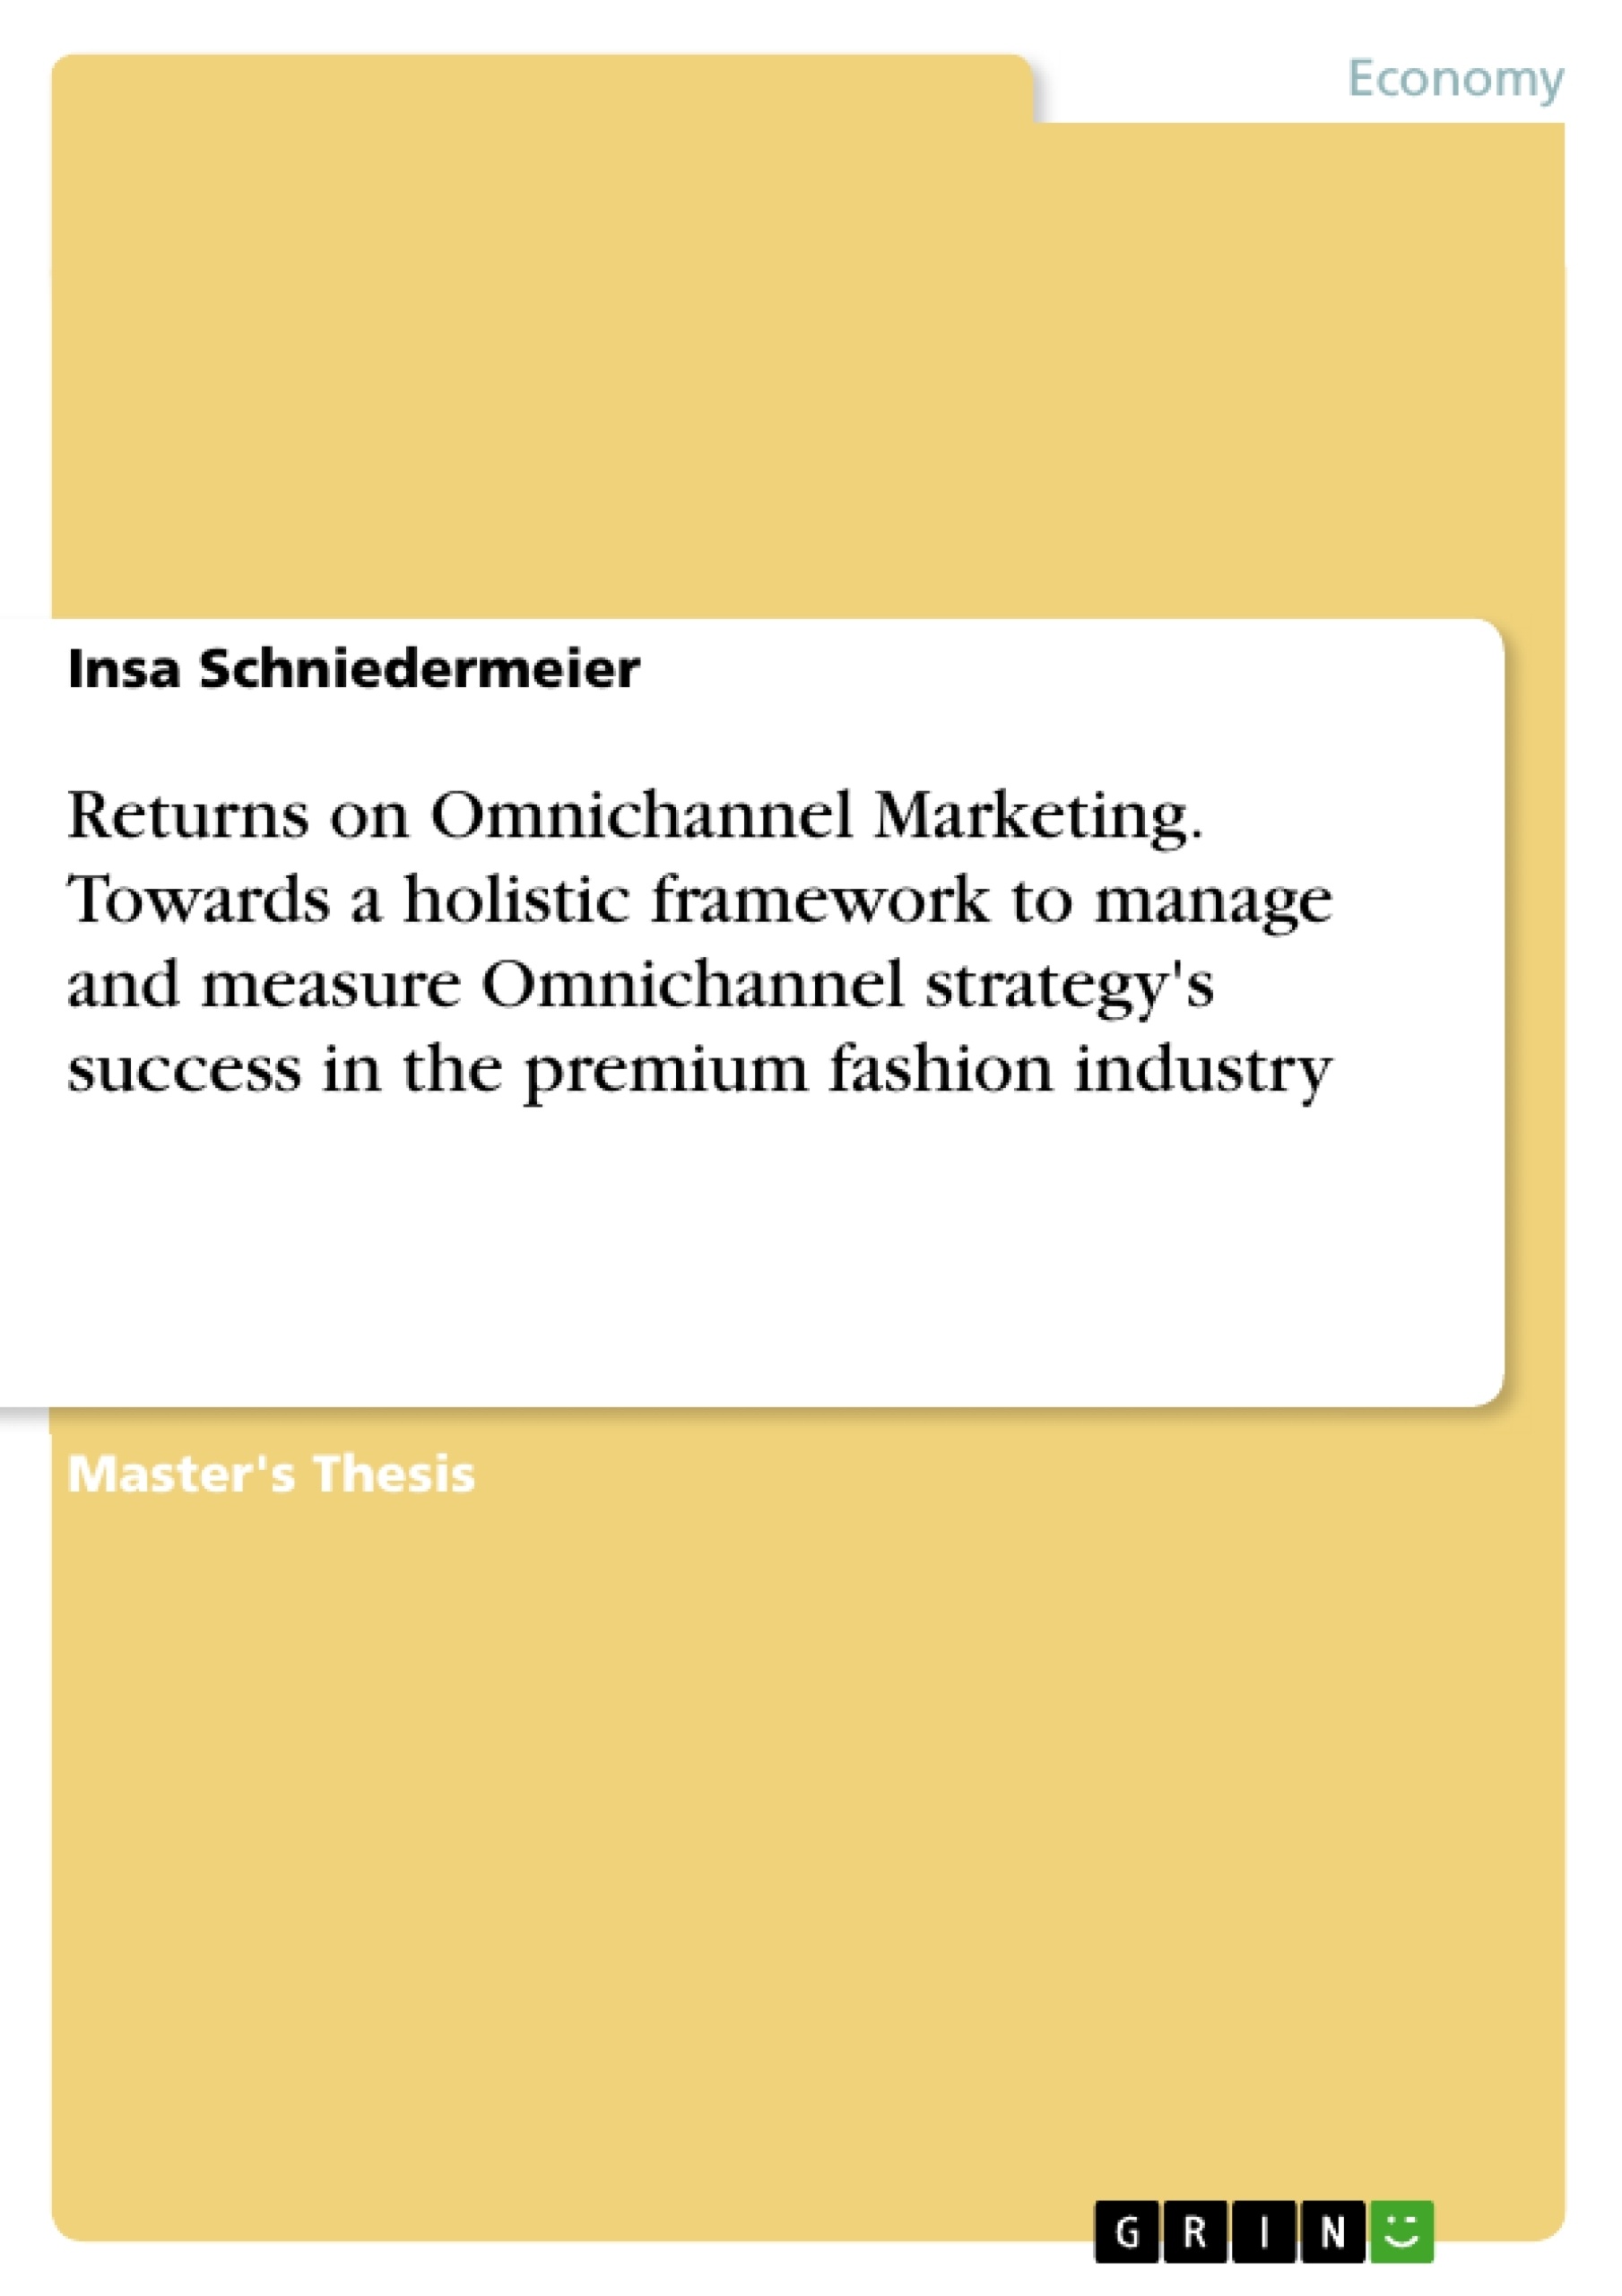 Titel: Returns on Omnichannel Marketing. Towards a holistic framework to manage and measure Omnichannel strategy's success in the premium fashion industry